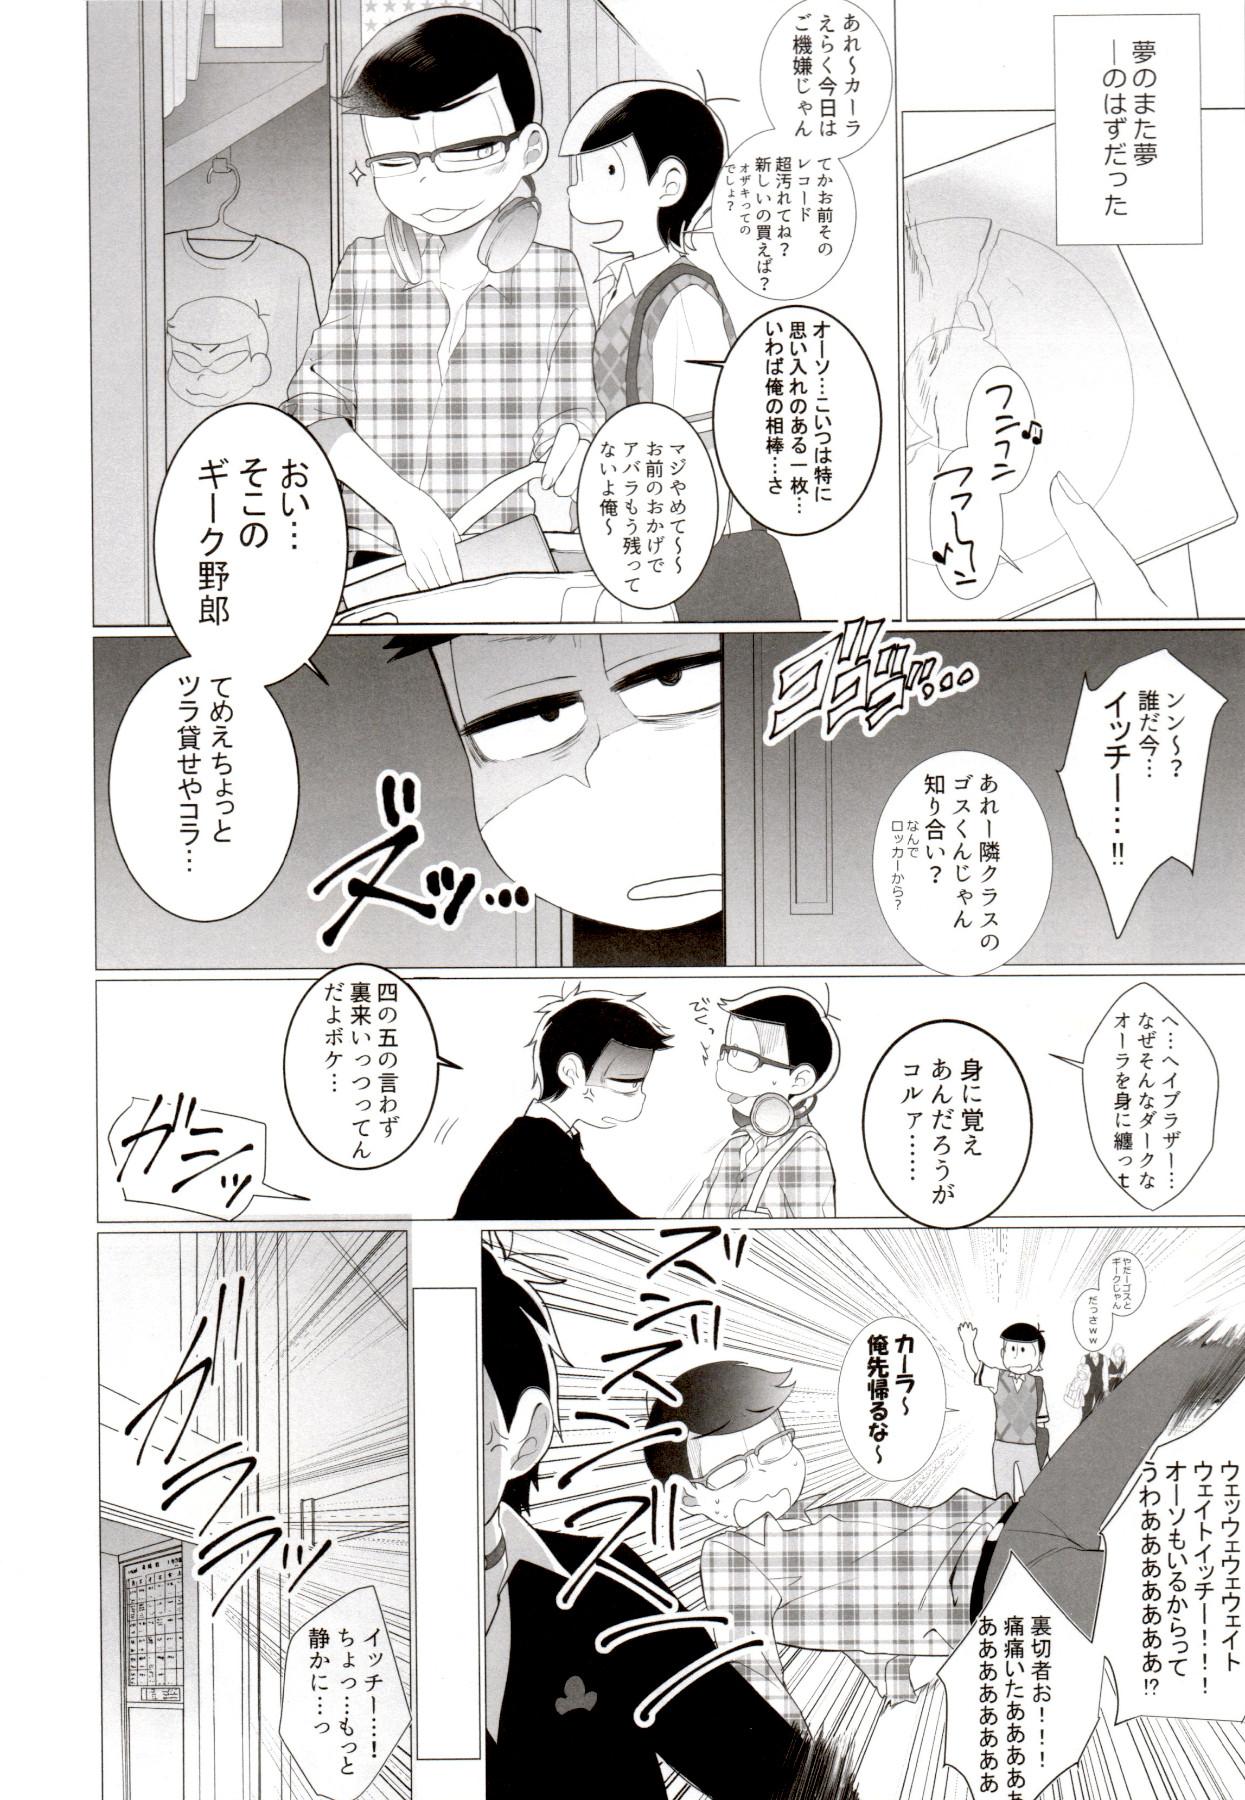 Coed IT IS THE COLORFUL LIFE 2 - Osomatsu-san Real Couple - Page 5